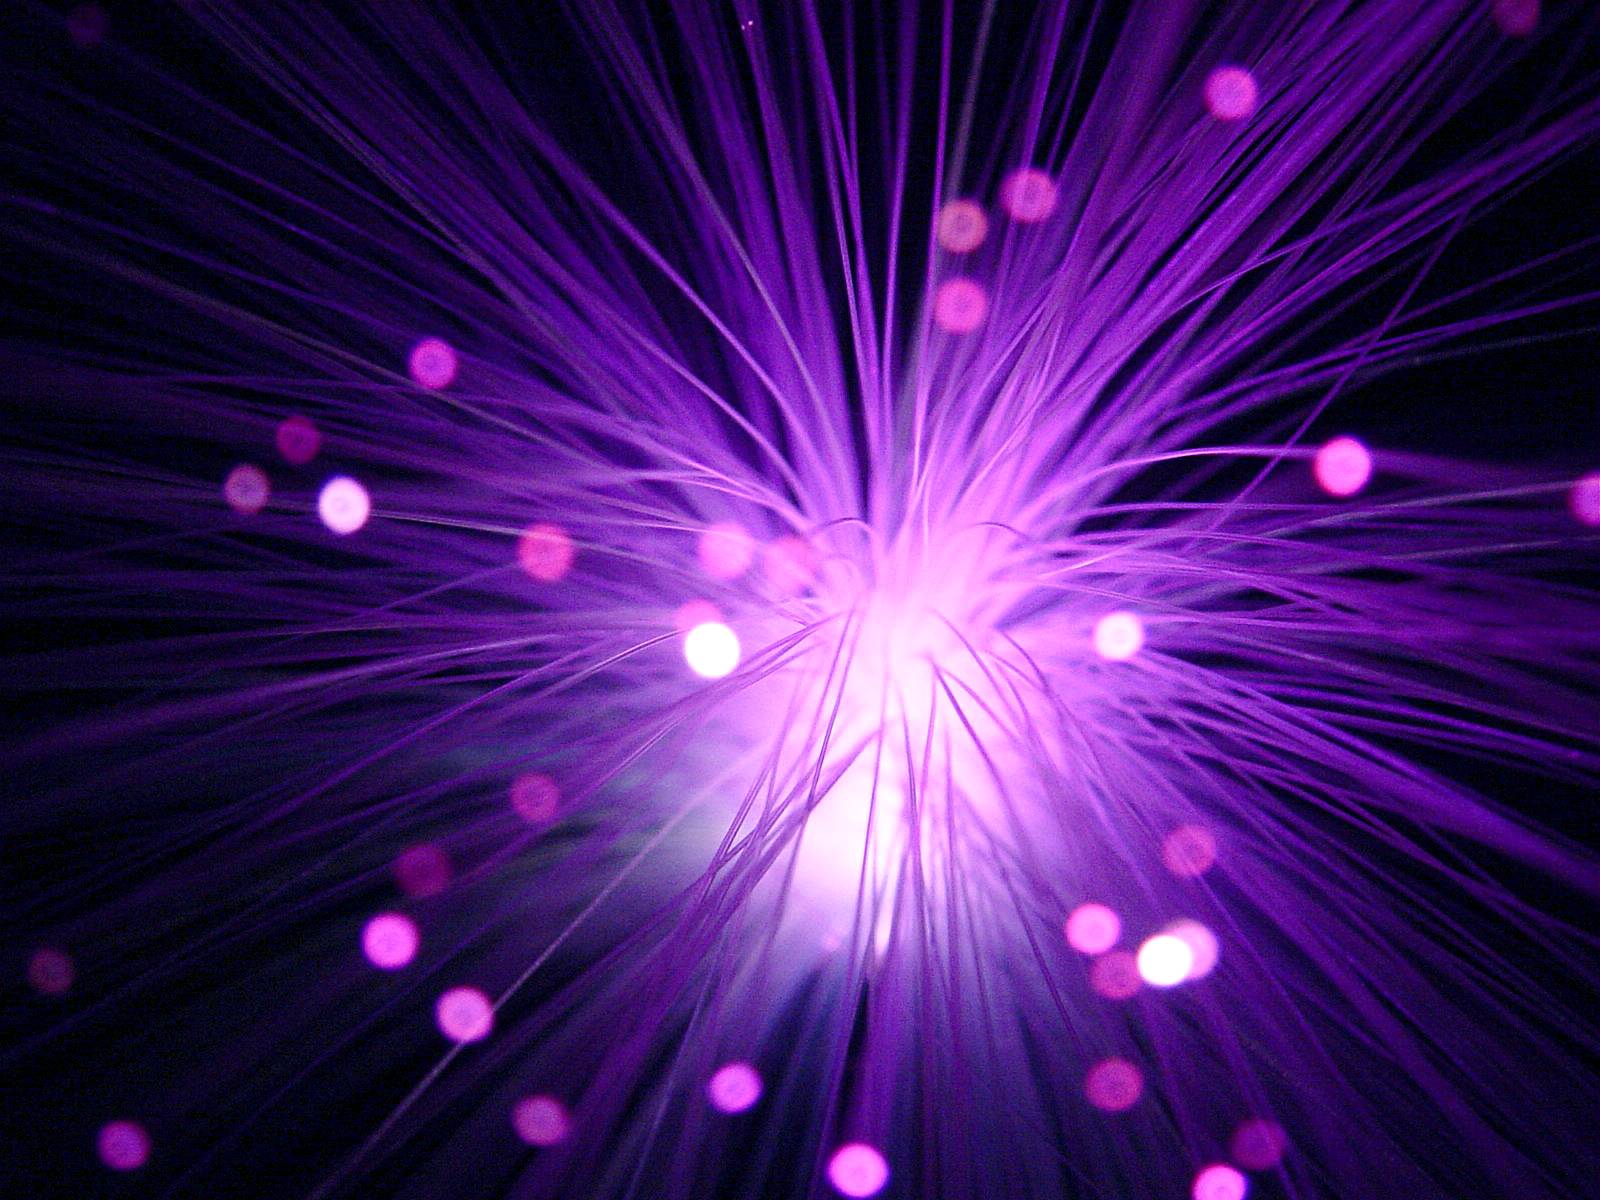  High Definition Purple Wallpaper Images for Free Download